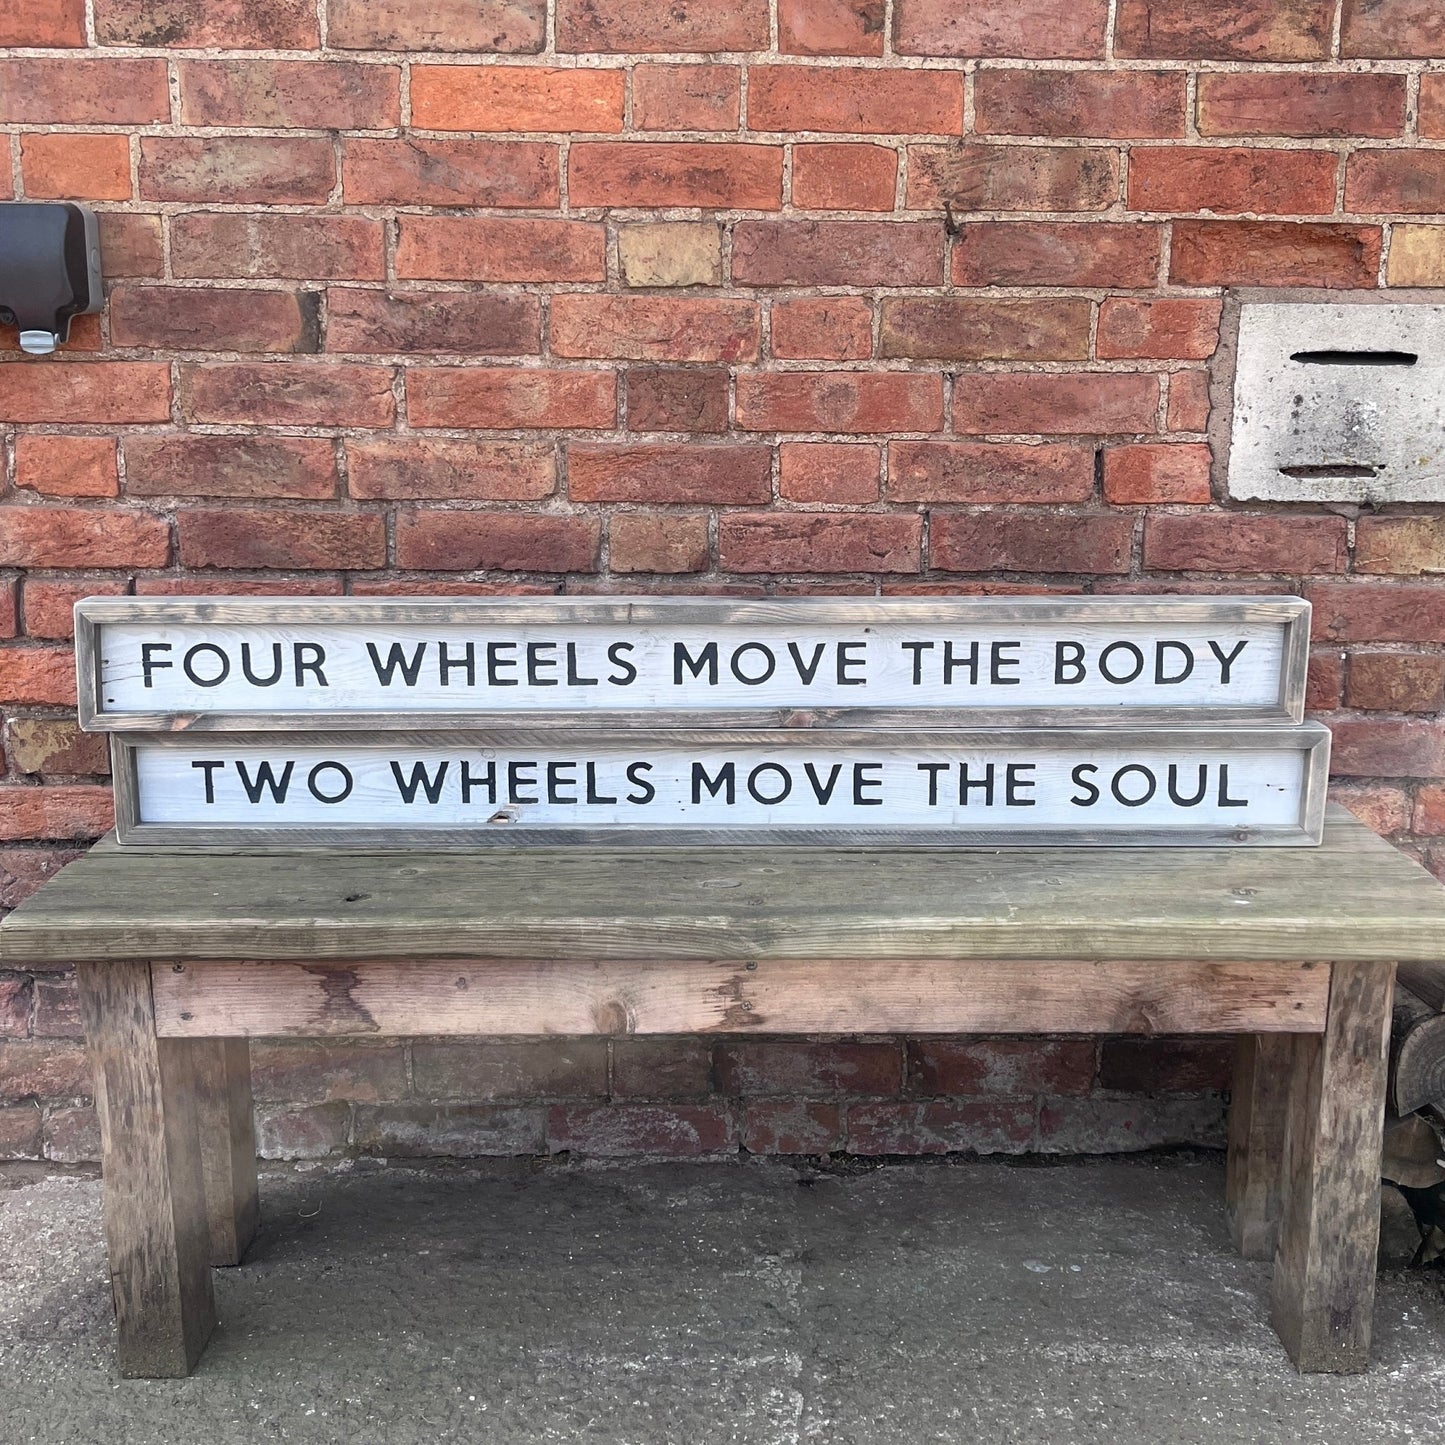 Two Wheels Move The Soul | Framed Long Wood Sign | Set of 2 - The Imperfect Wood Company - Rustic Framed Long Wood Sign